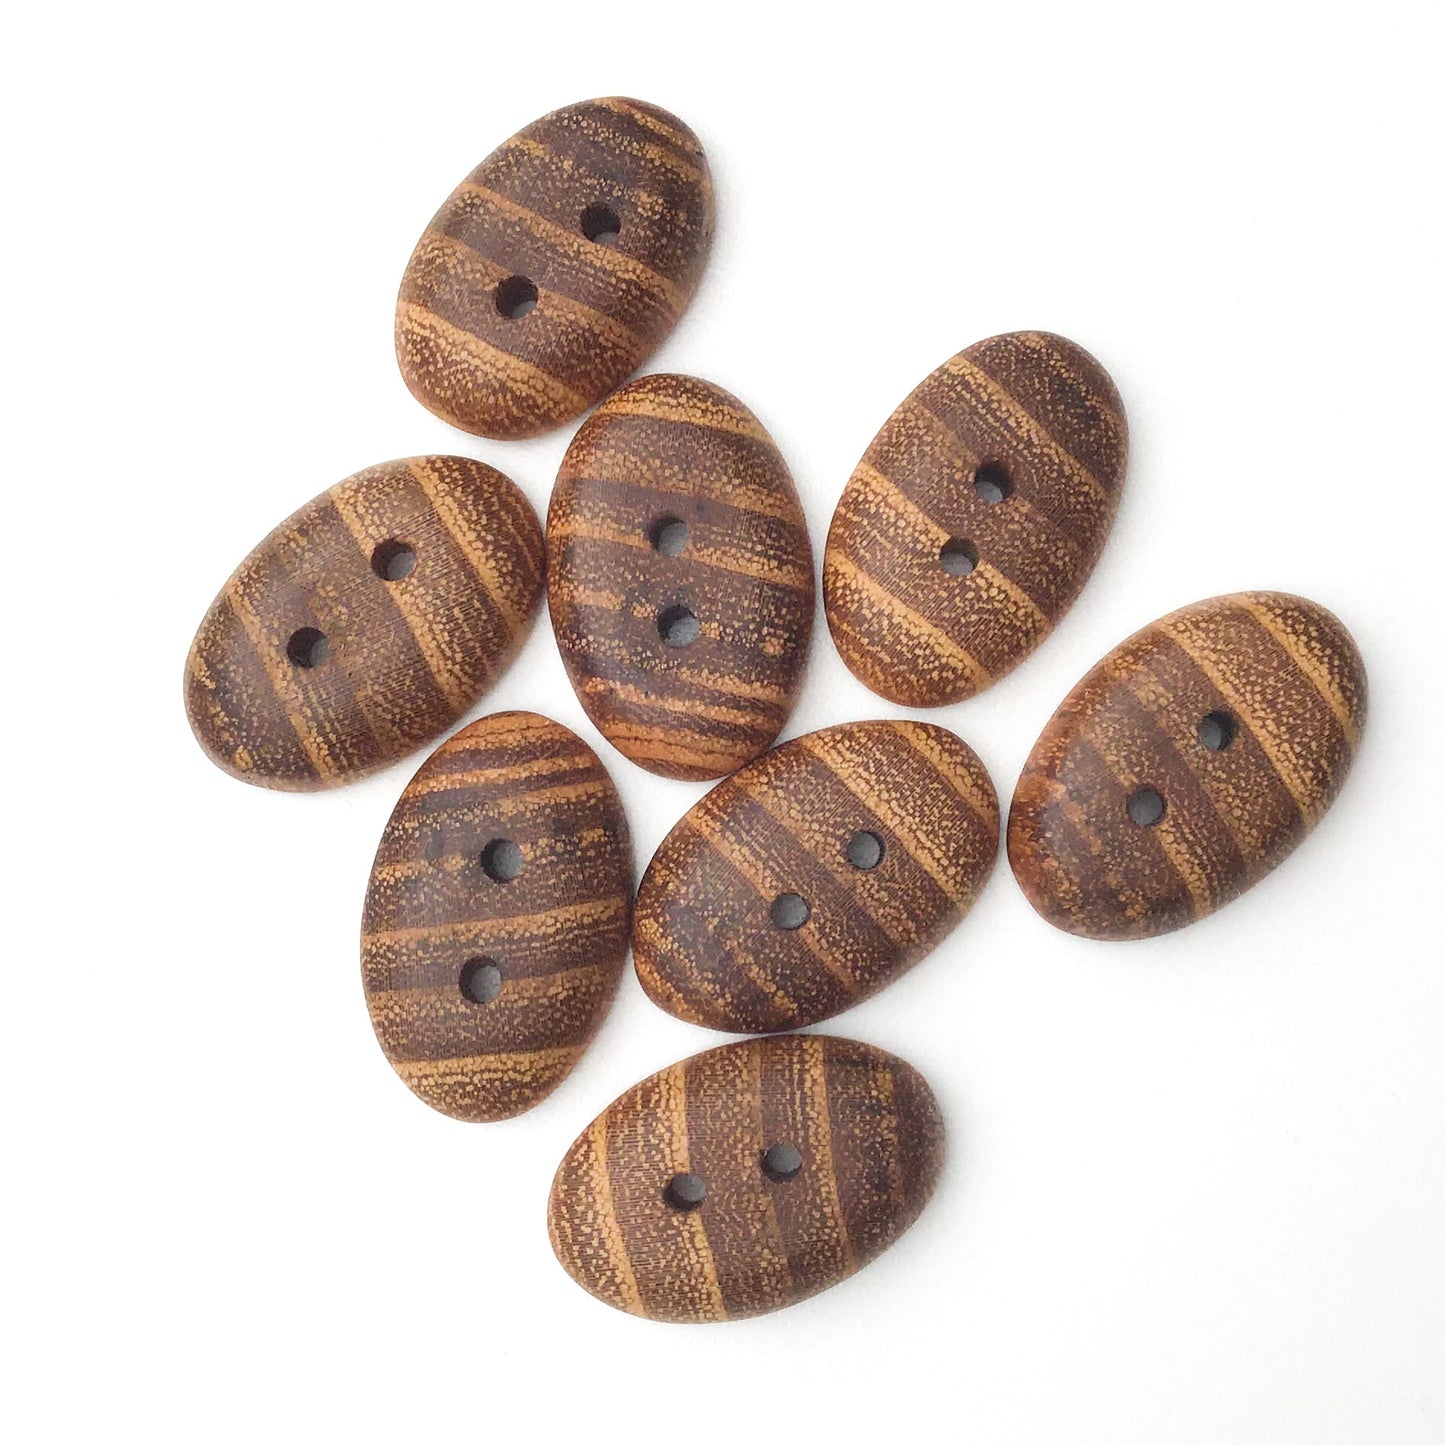 Black Locust Wood Buttons - Oval Wood Buttons - 3/4" x 1 1/16"